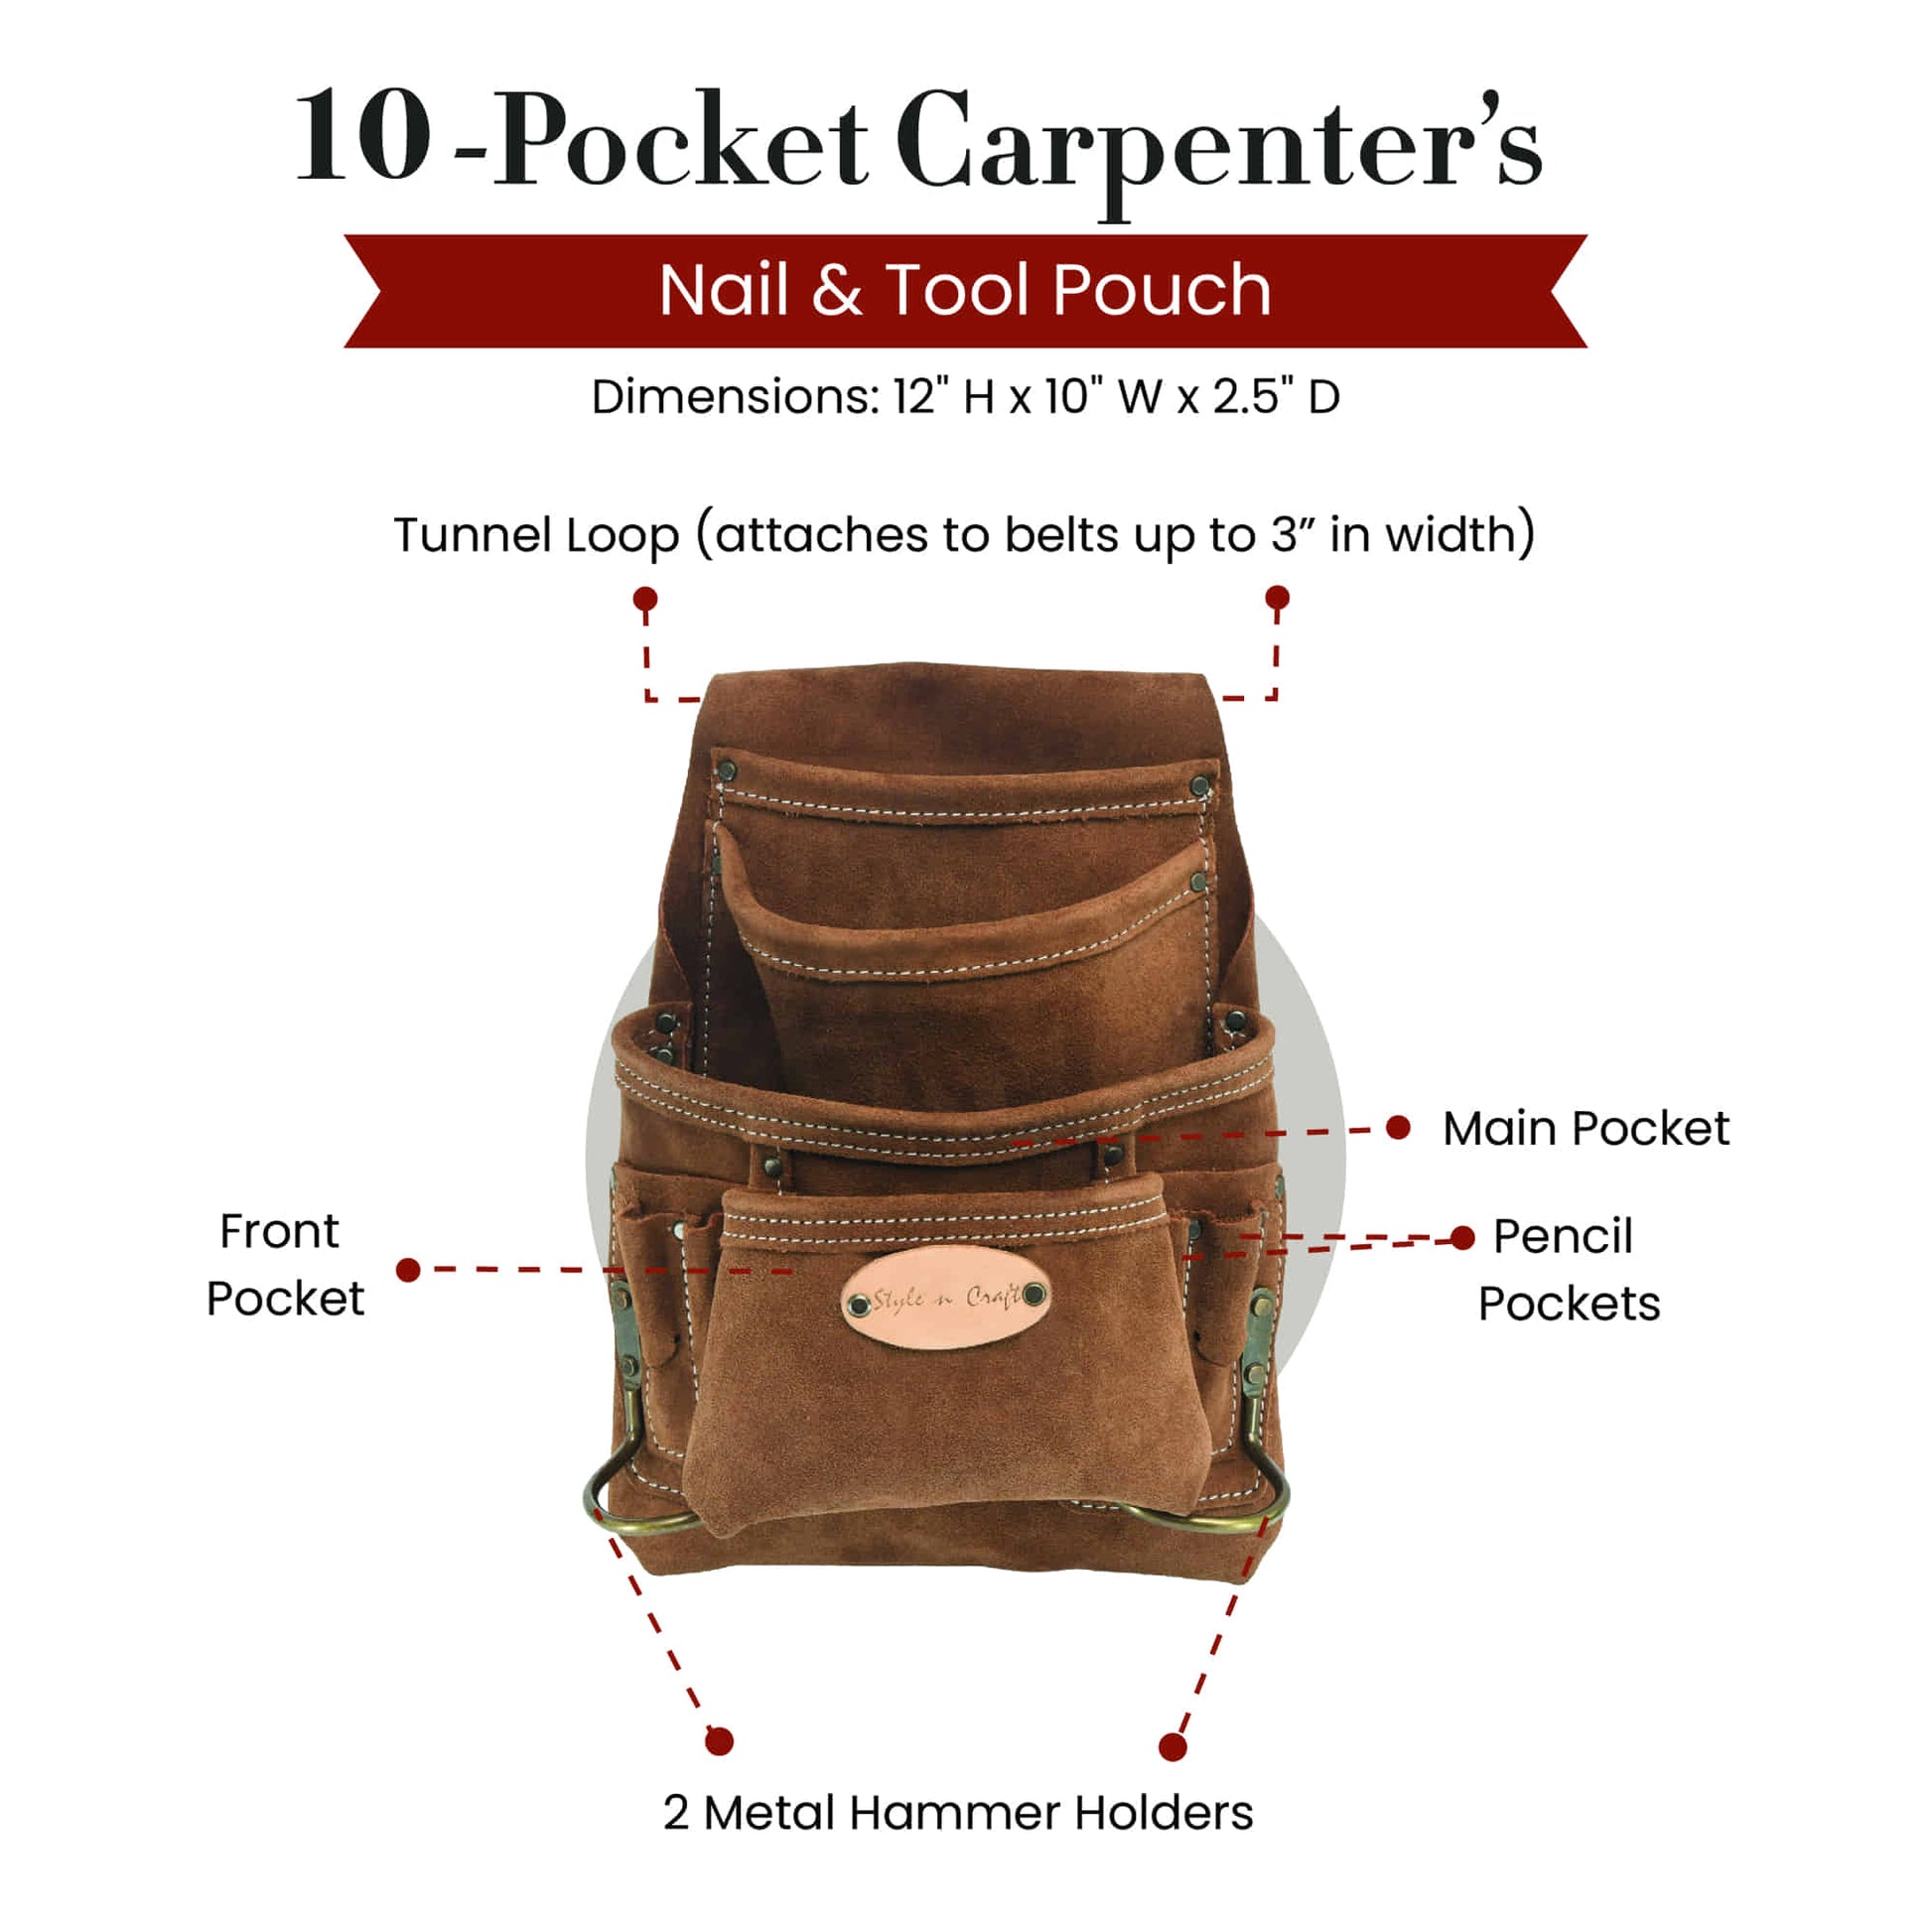 Style n Craft 88923 - 10 Pocket Carpenter's Nail and Tool Pouch in Heavy Duty Suede Leather in Dark Tan Color with Antique Finish Hardware - Front View showing the details